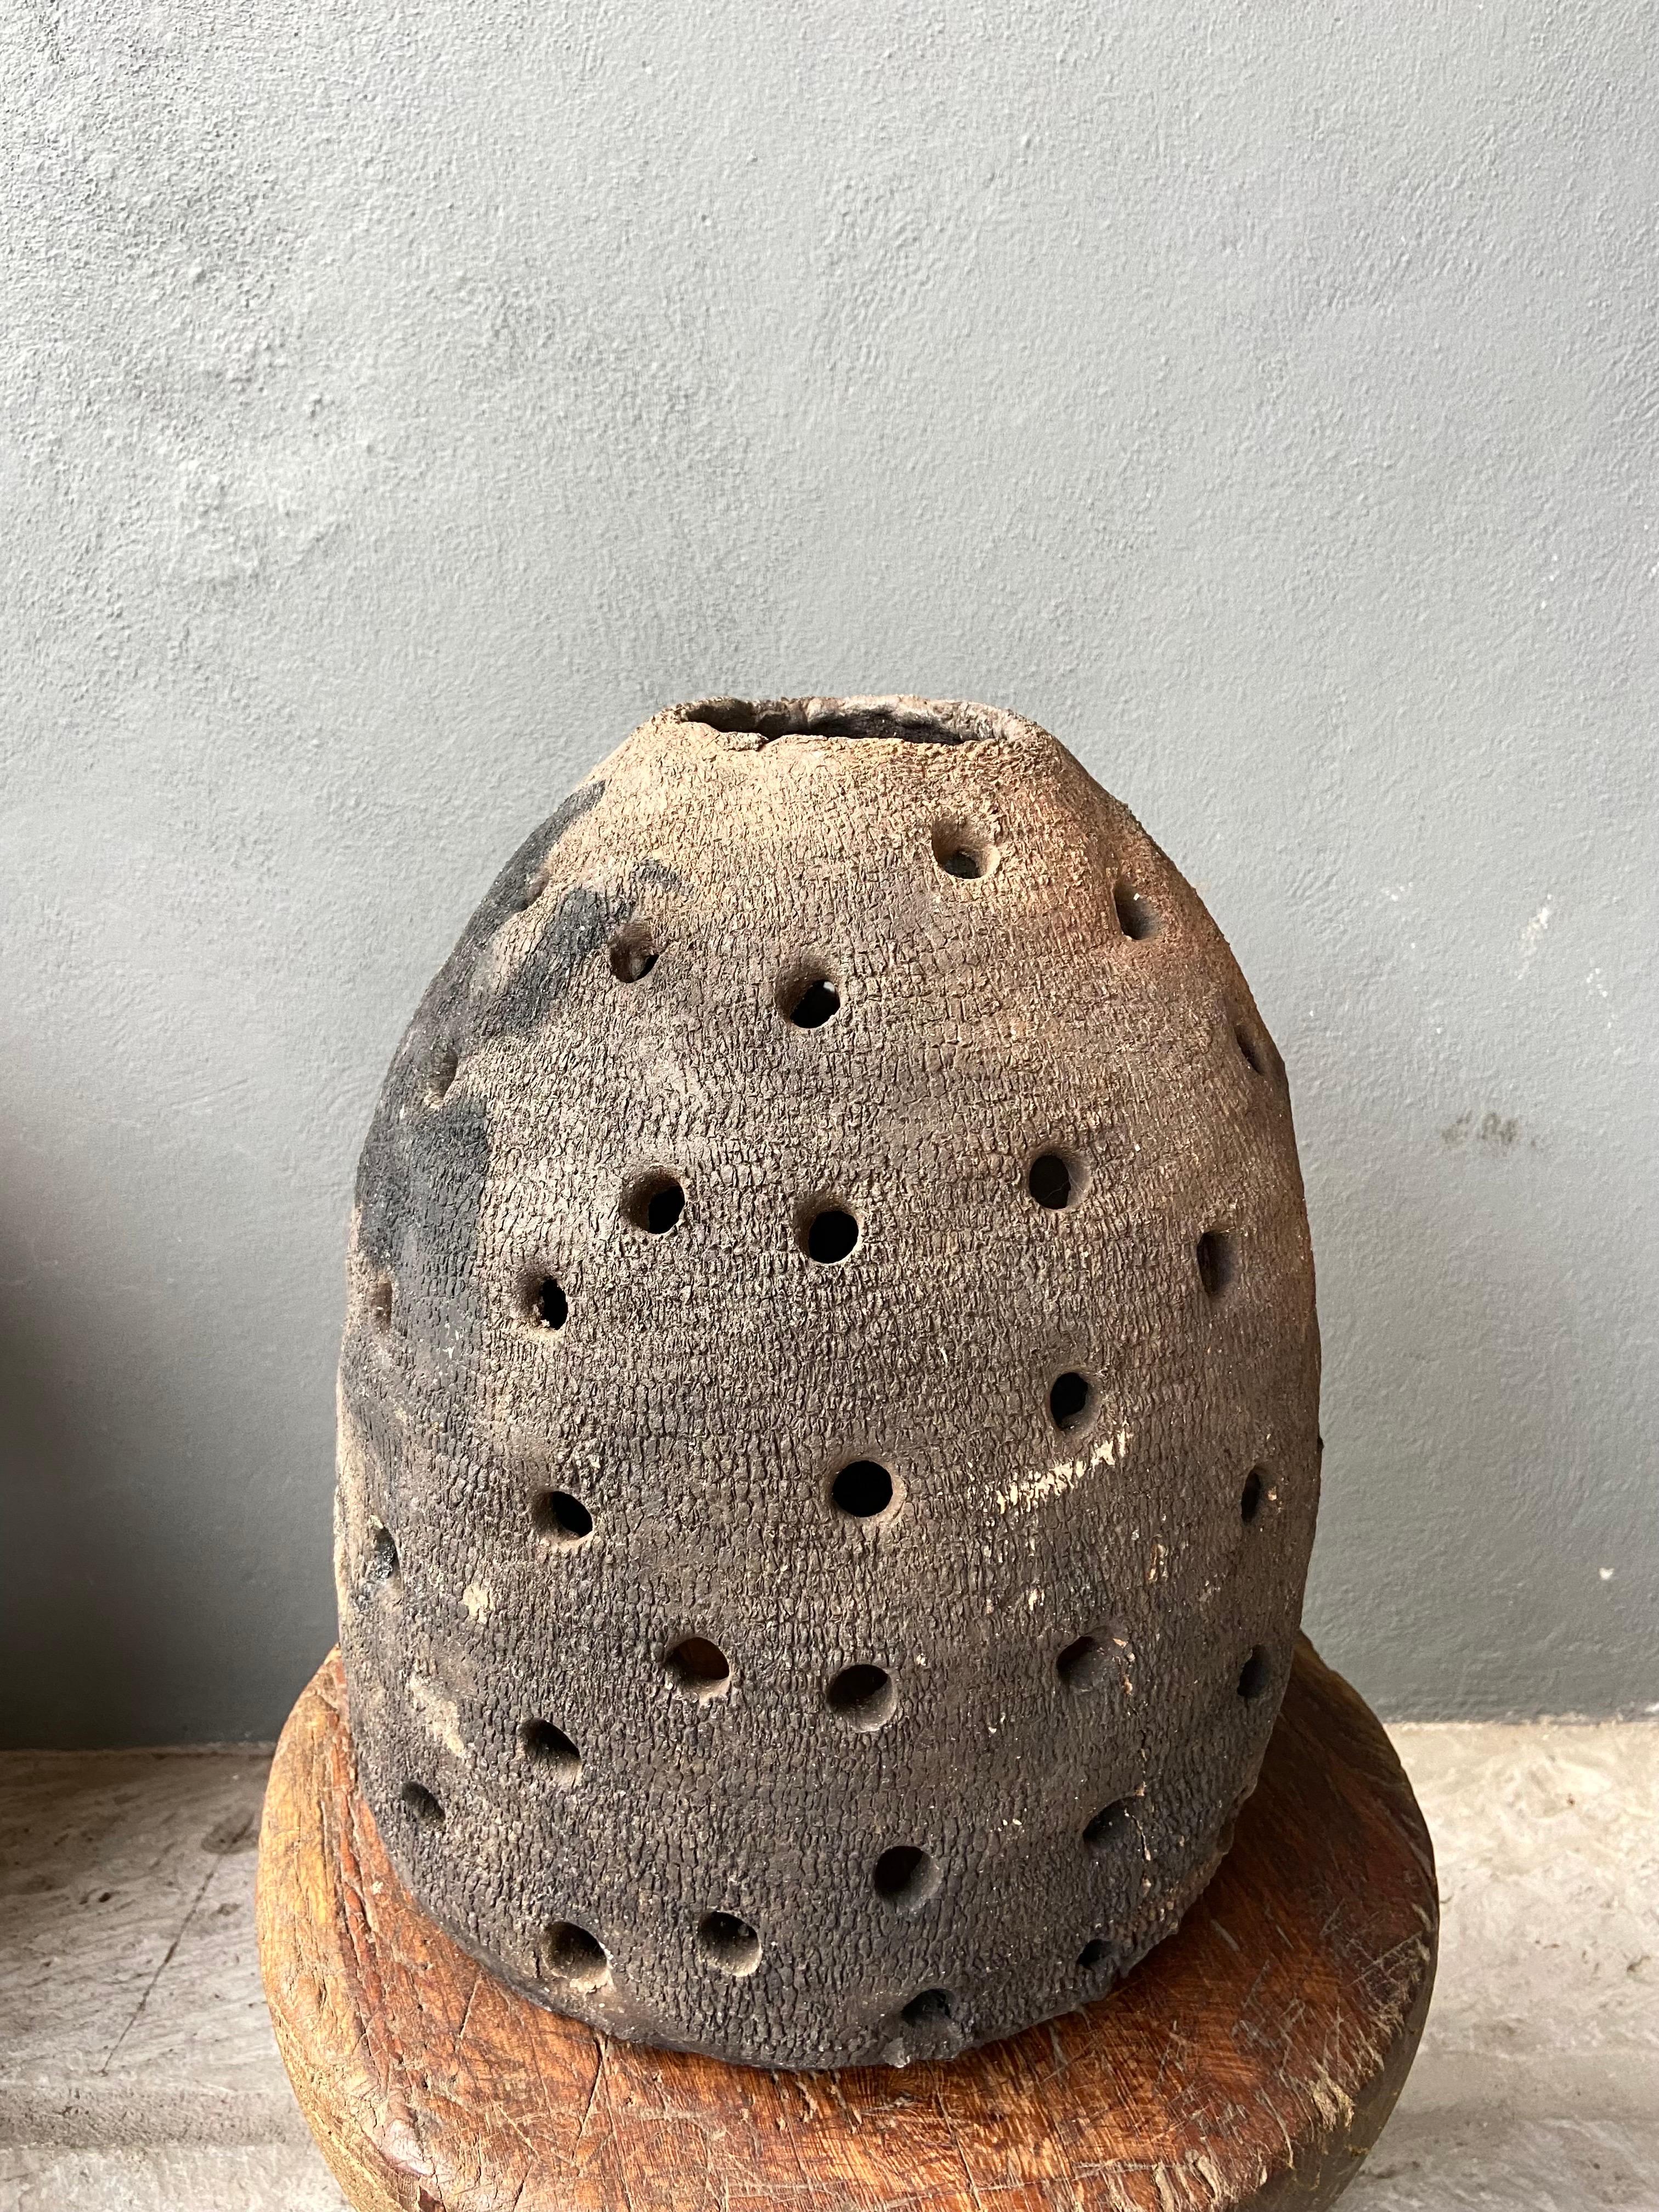 Primitive terracotta charcoal burner from the northern Sierra of Puebla,, Mexico, circa 1950´s. Shows considerable wear in coloration and texture. A rare find.